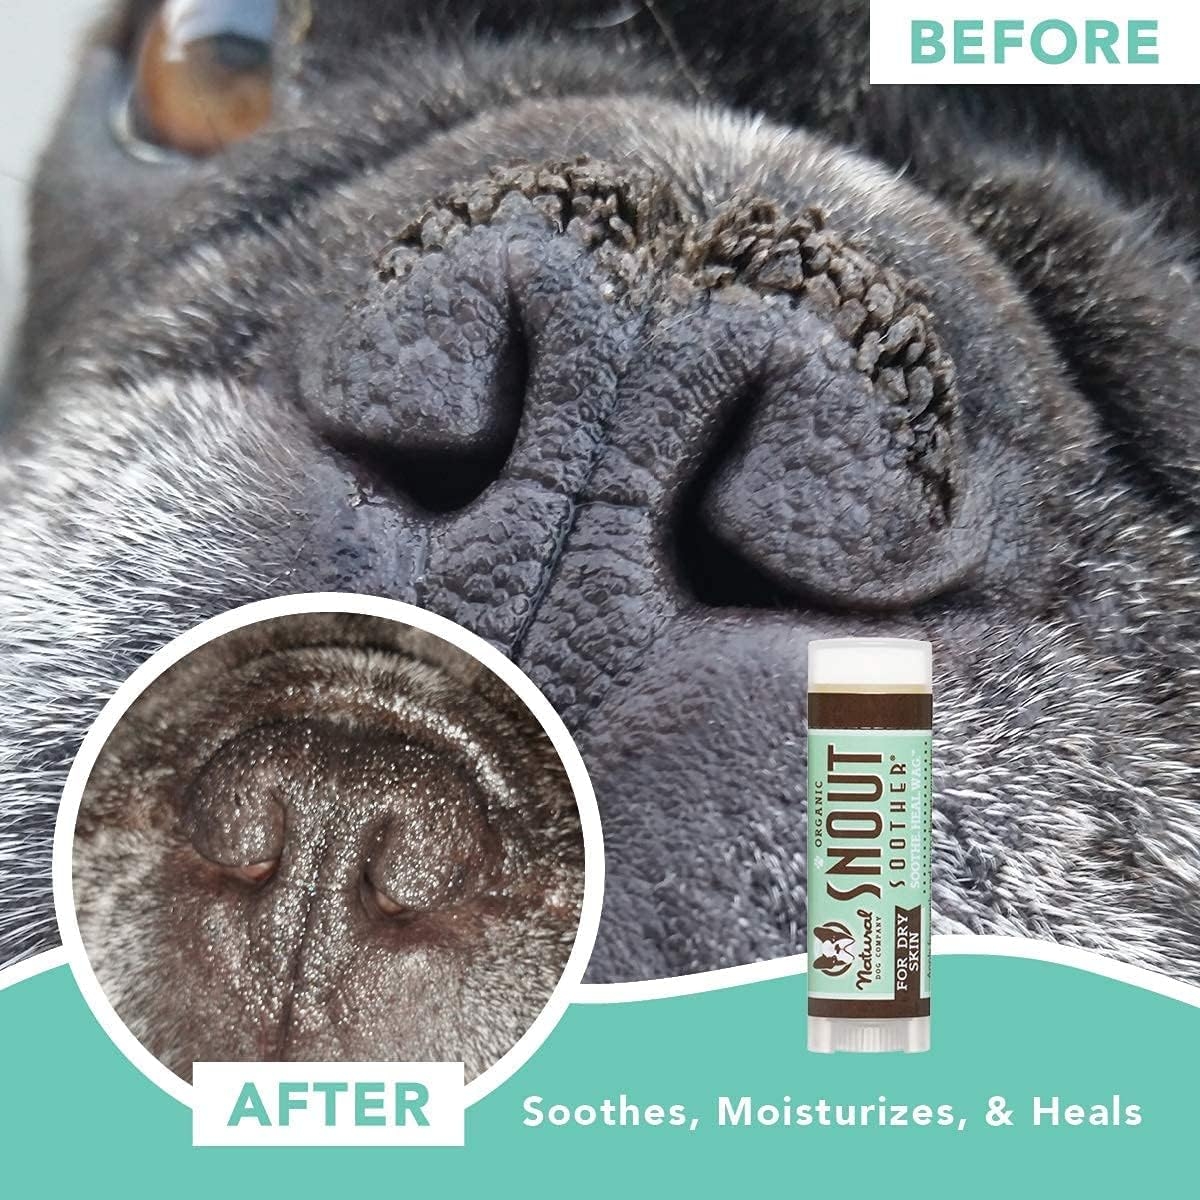 Natural Dog Company Snout Soother, Dog Nose Balm for Chapped, Crusty and Dry Dog Noses, Organic, All Natural Ingredients